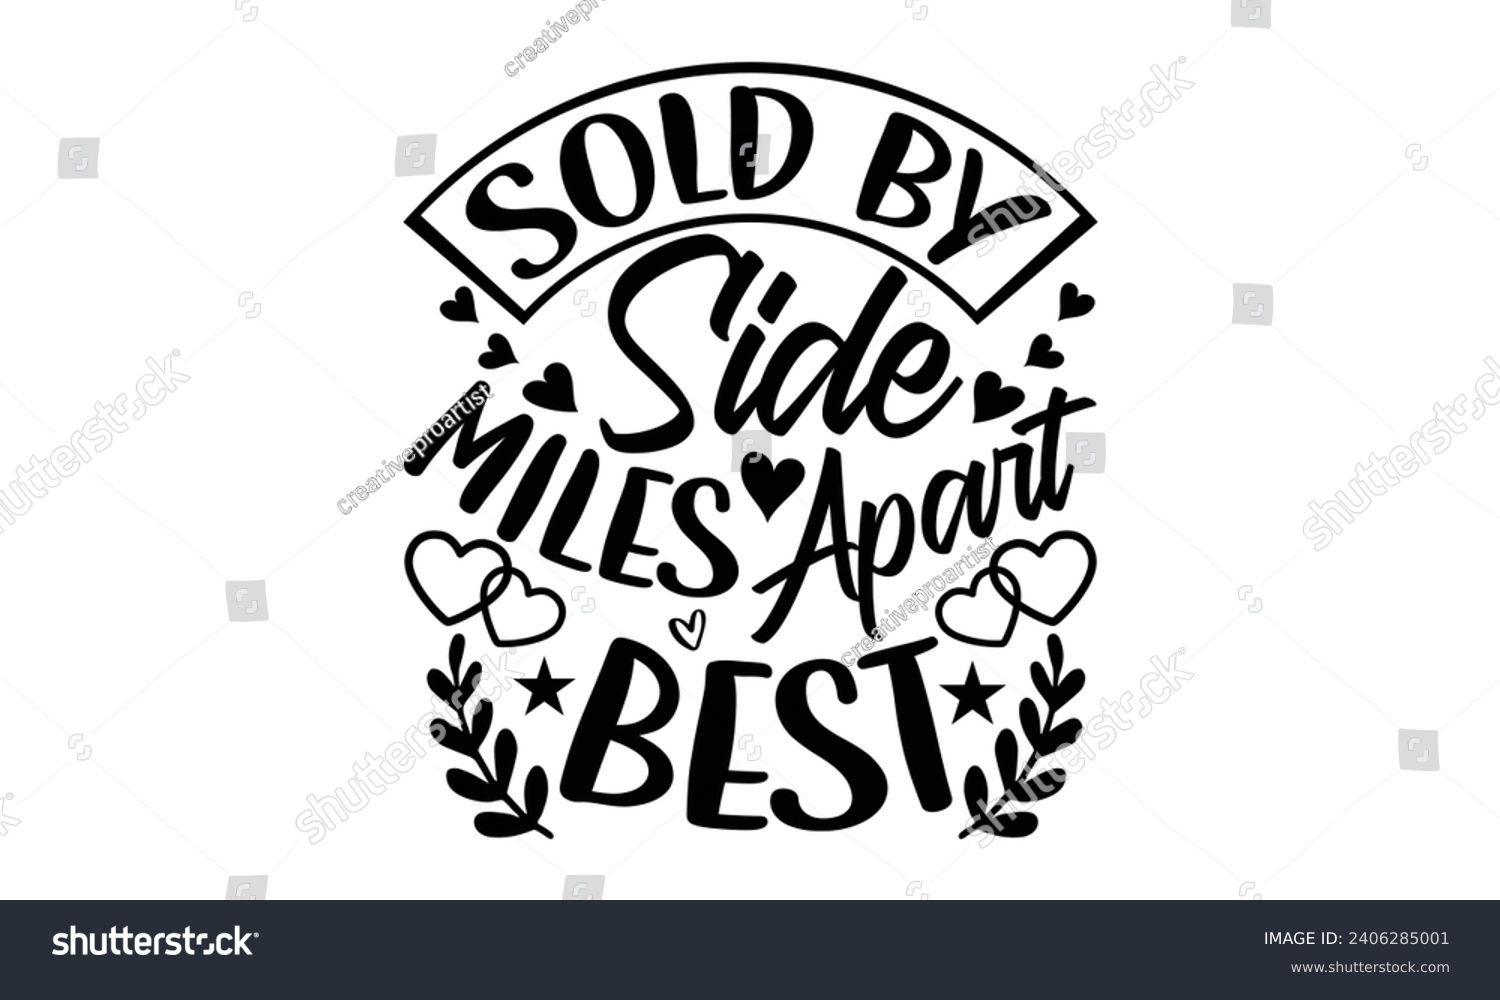 SVG of Sold By Side Miles Apart Best- Best friends t- shirt design, Hand drawn lettering phrase, Illustration for prints on bags, posters, cards eps, Files for Cutting, Isolated on white background. svg